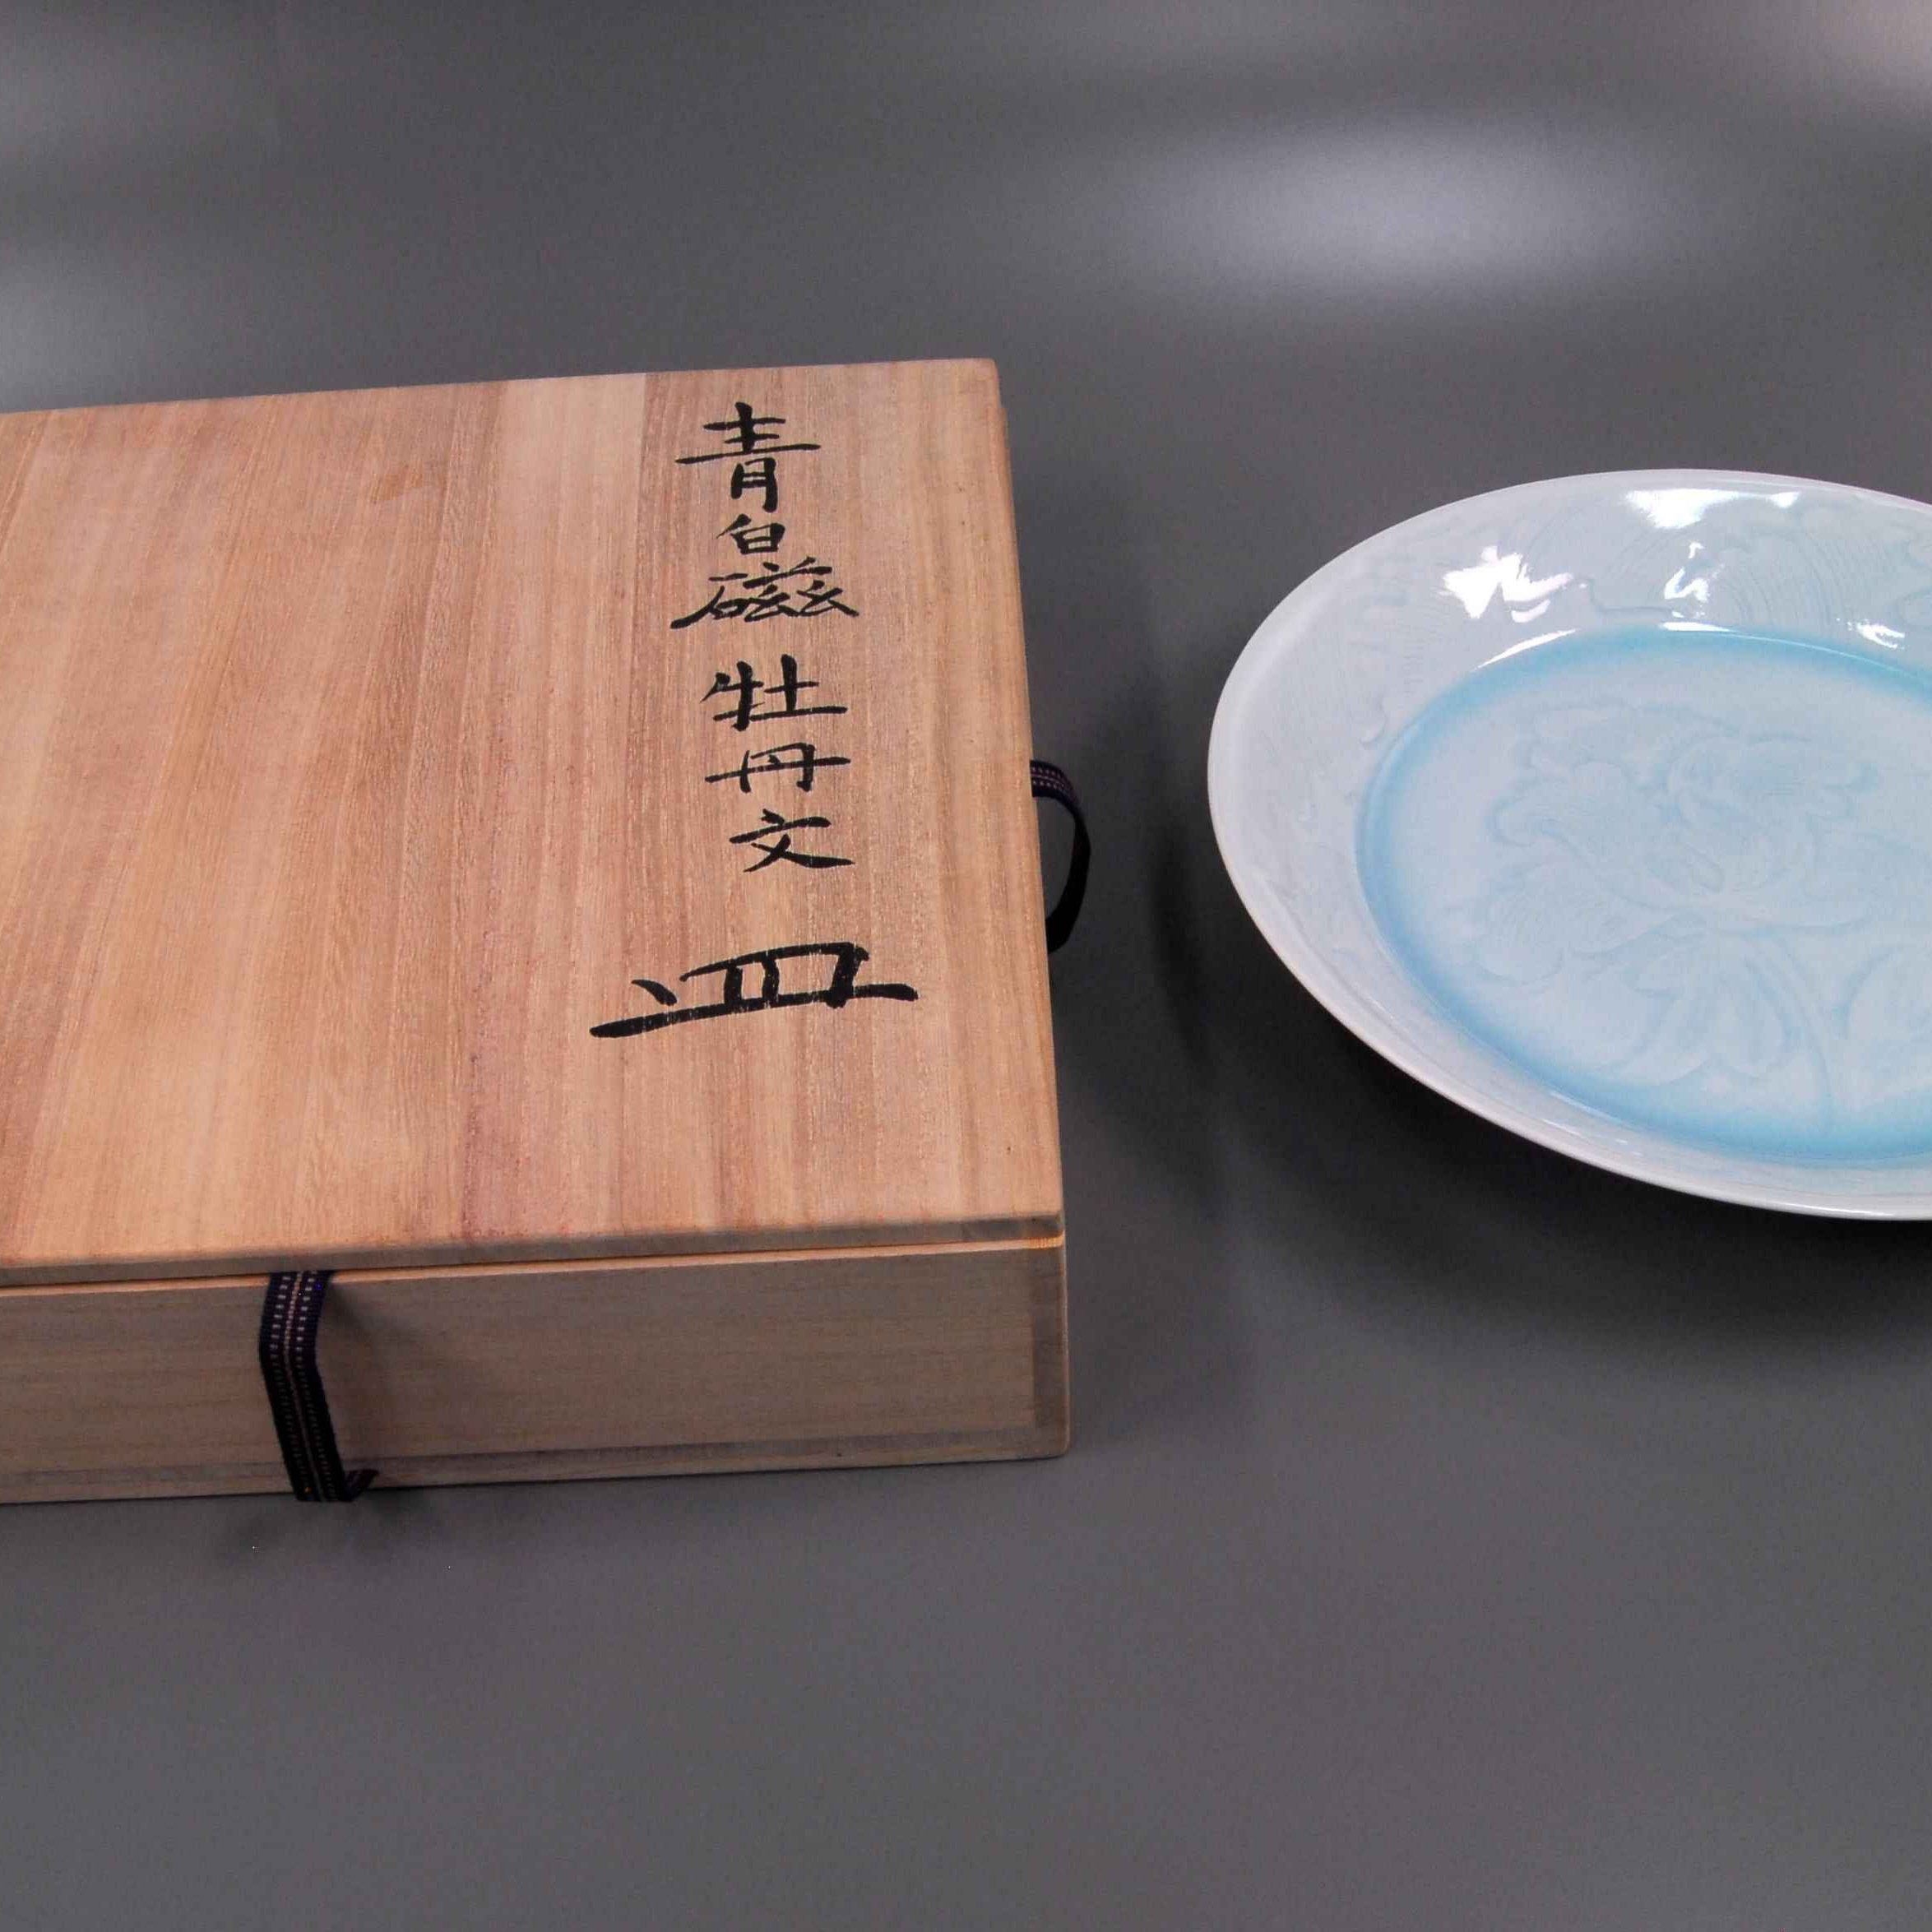 The porcelain plate and its special wooden case. The signature of the producer is on the surface of the box.